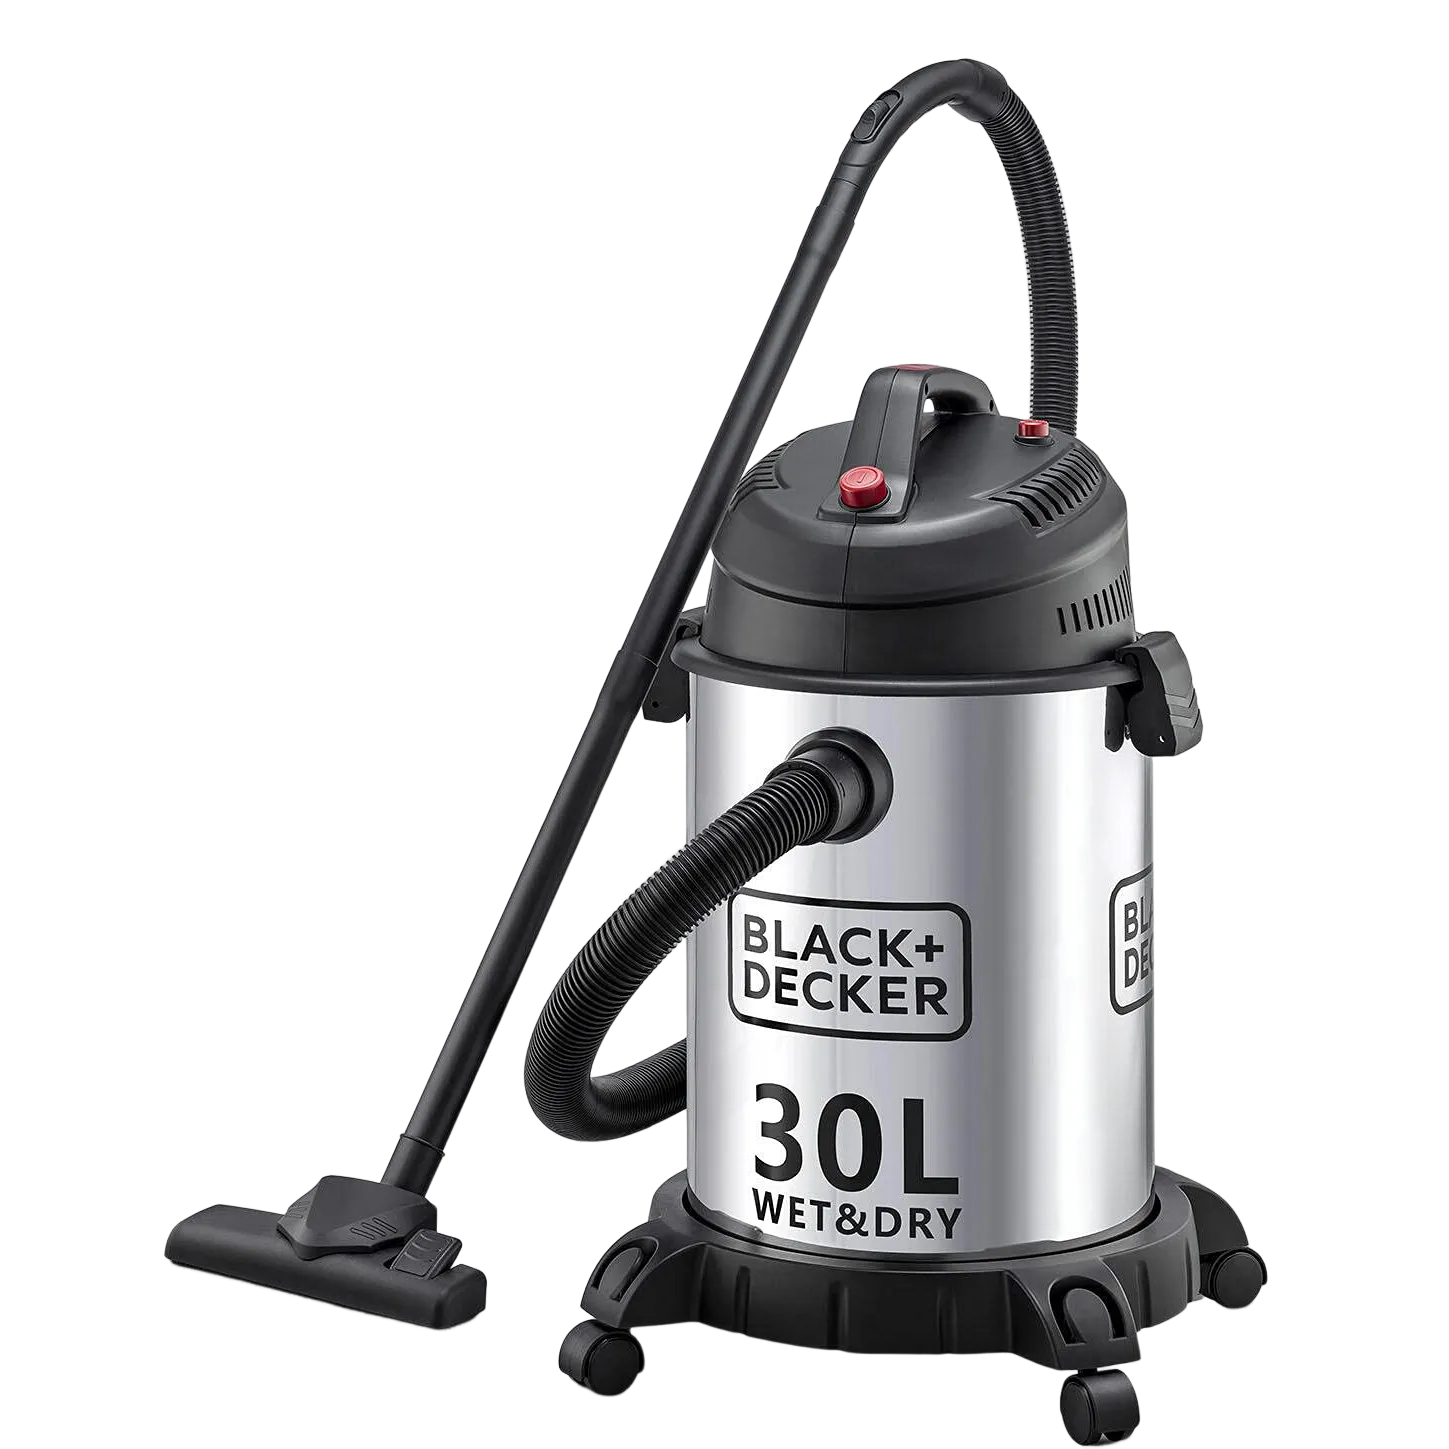 Black+Decker Drum Vacuum Cleaner Stainless Steel With Wet And Dry Function 1610W WV1450-B5 Silver/Black